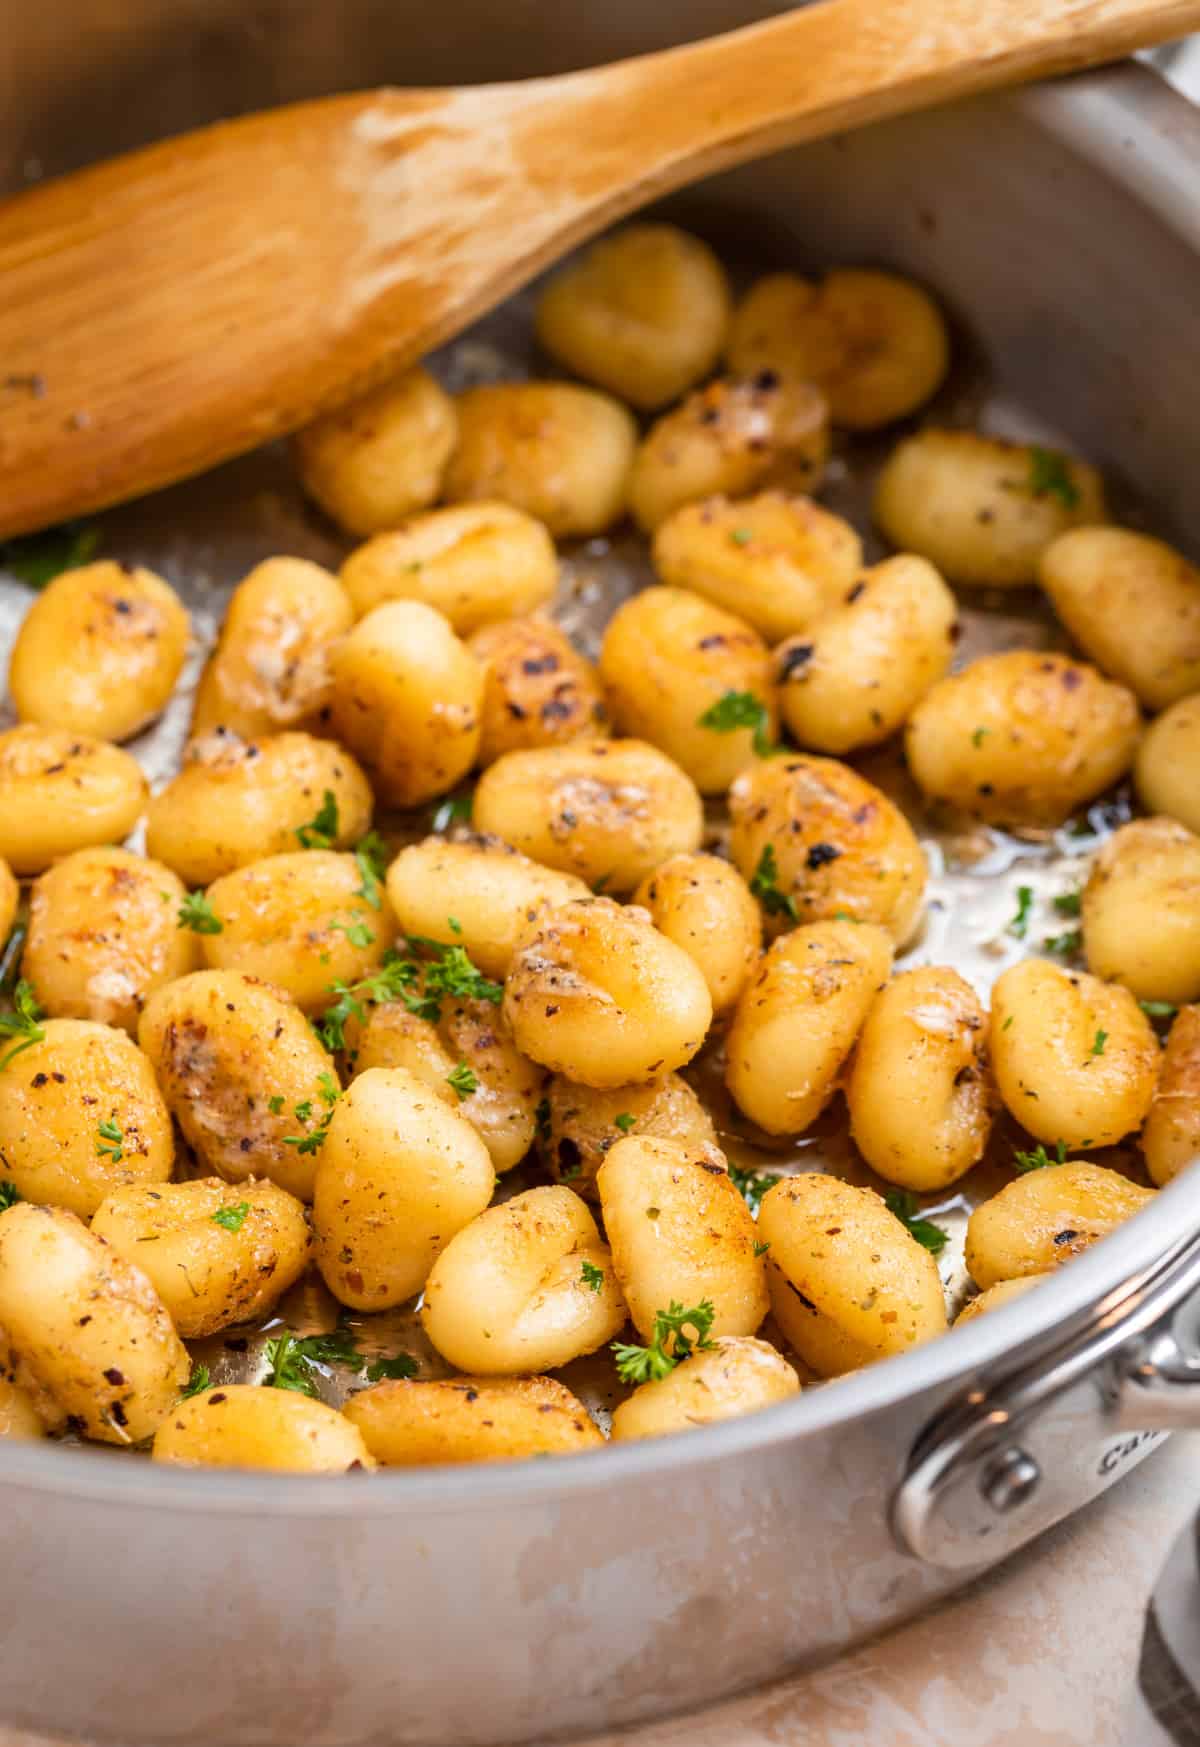 Pan fried gnocchi in skillet with chopped parsley and wooden spoon.